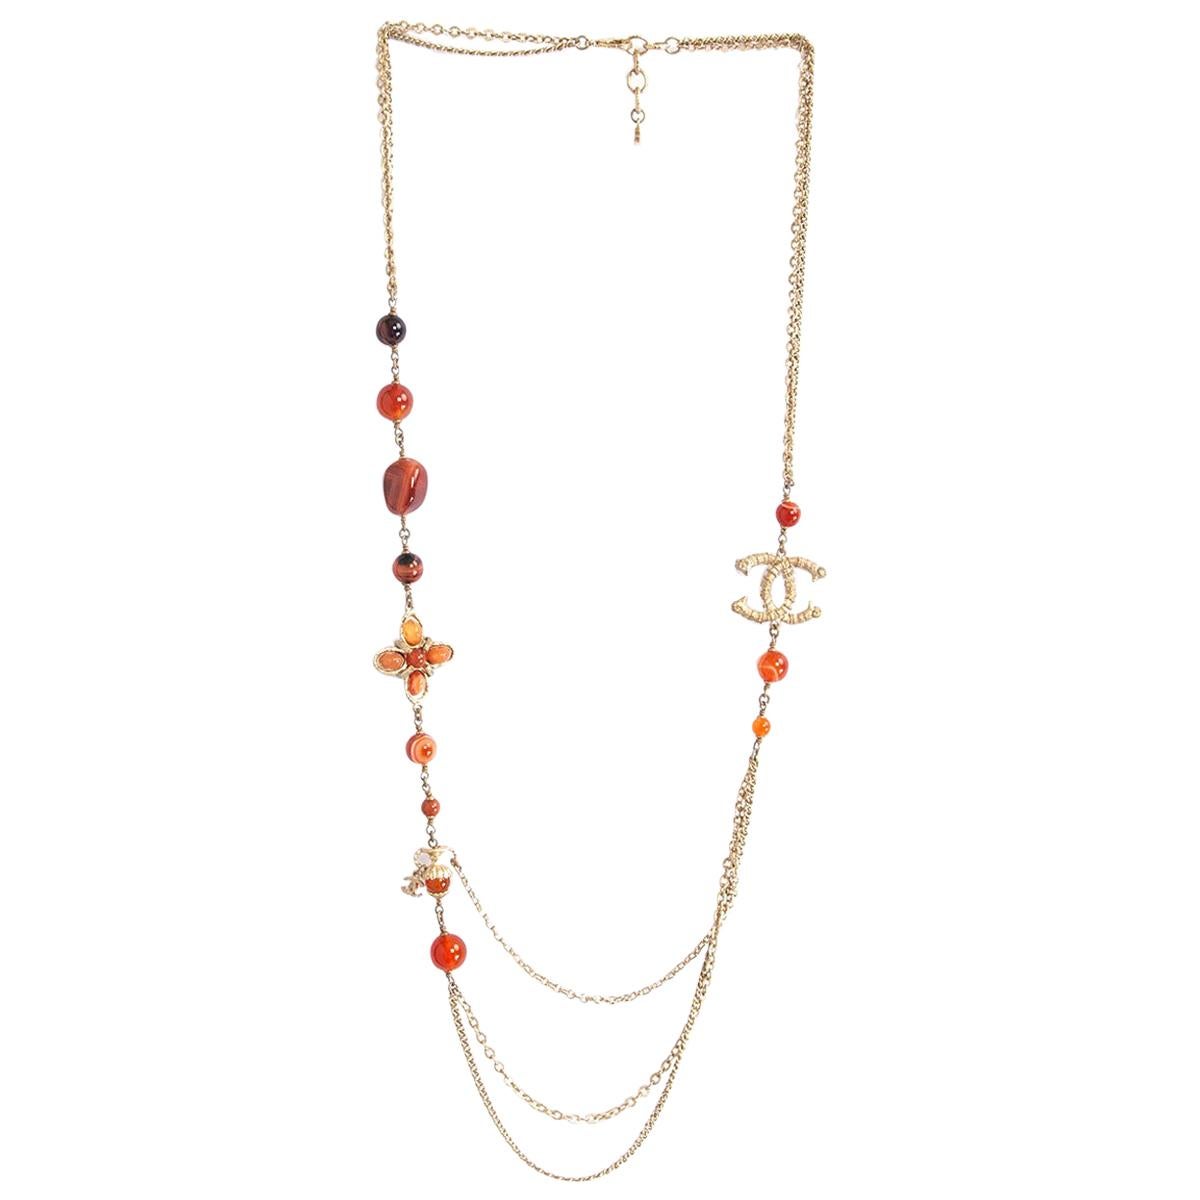 CHANEL orange & gold 2018 CRUISE PARIS GREECE BEADED Chain Necklace For Sale